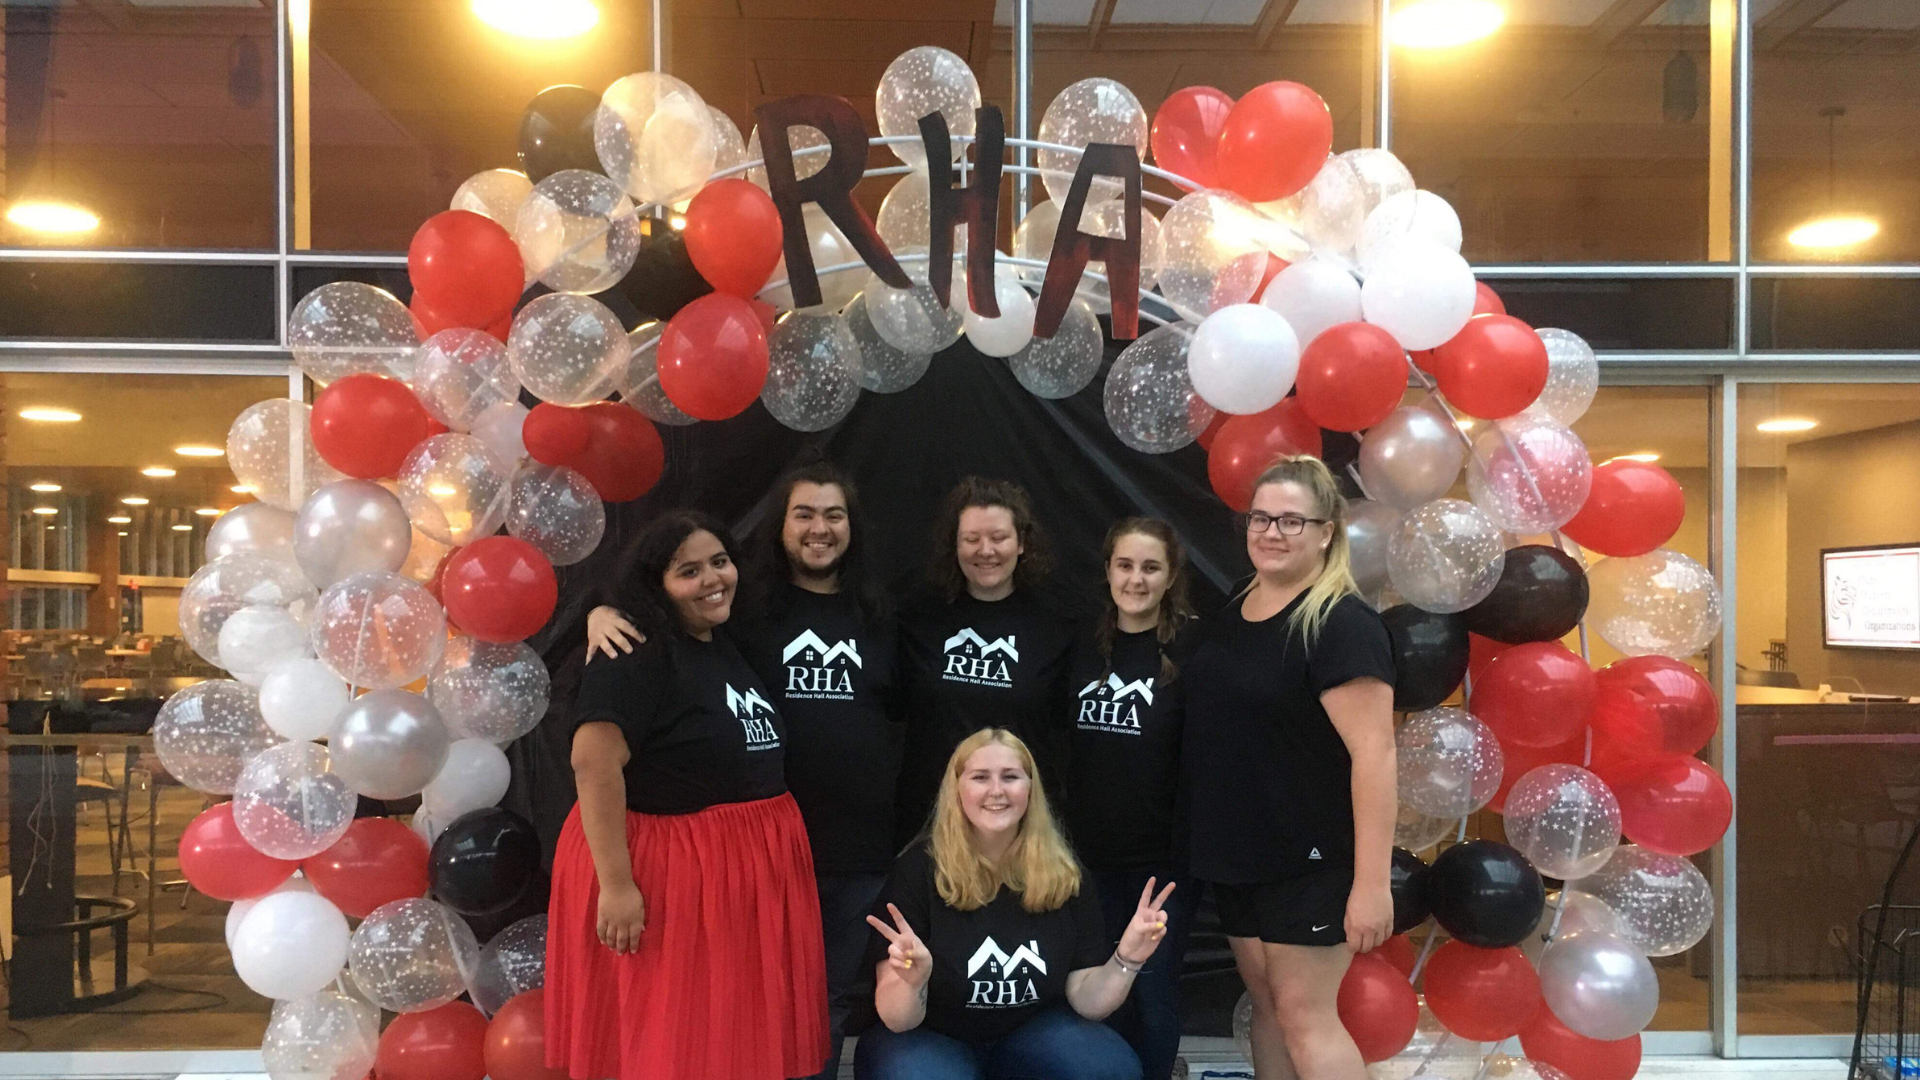 5 students in RHA shirts stand in front of a red and white balloon arch